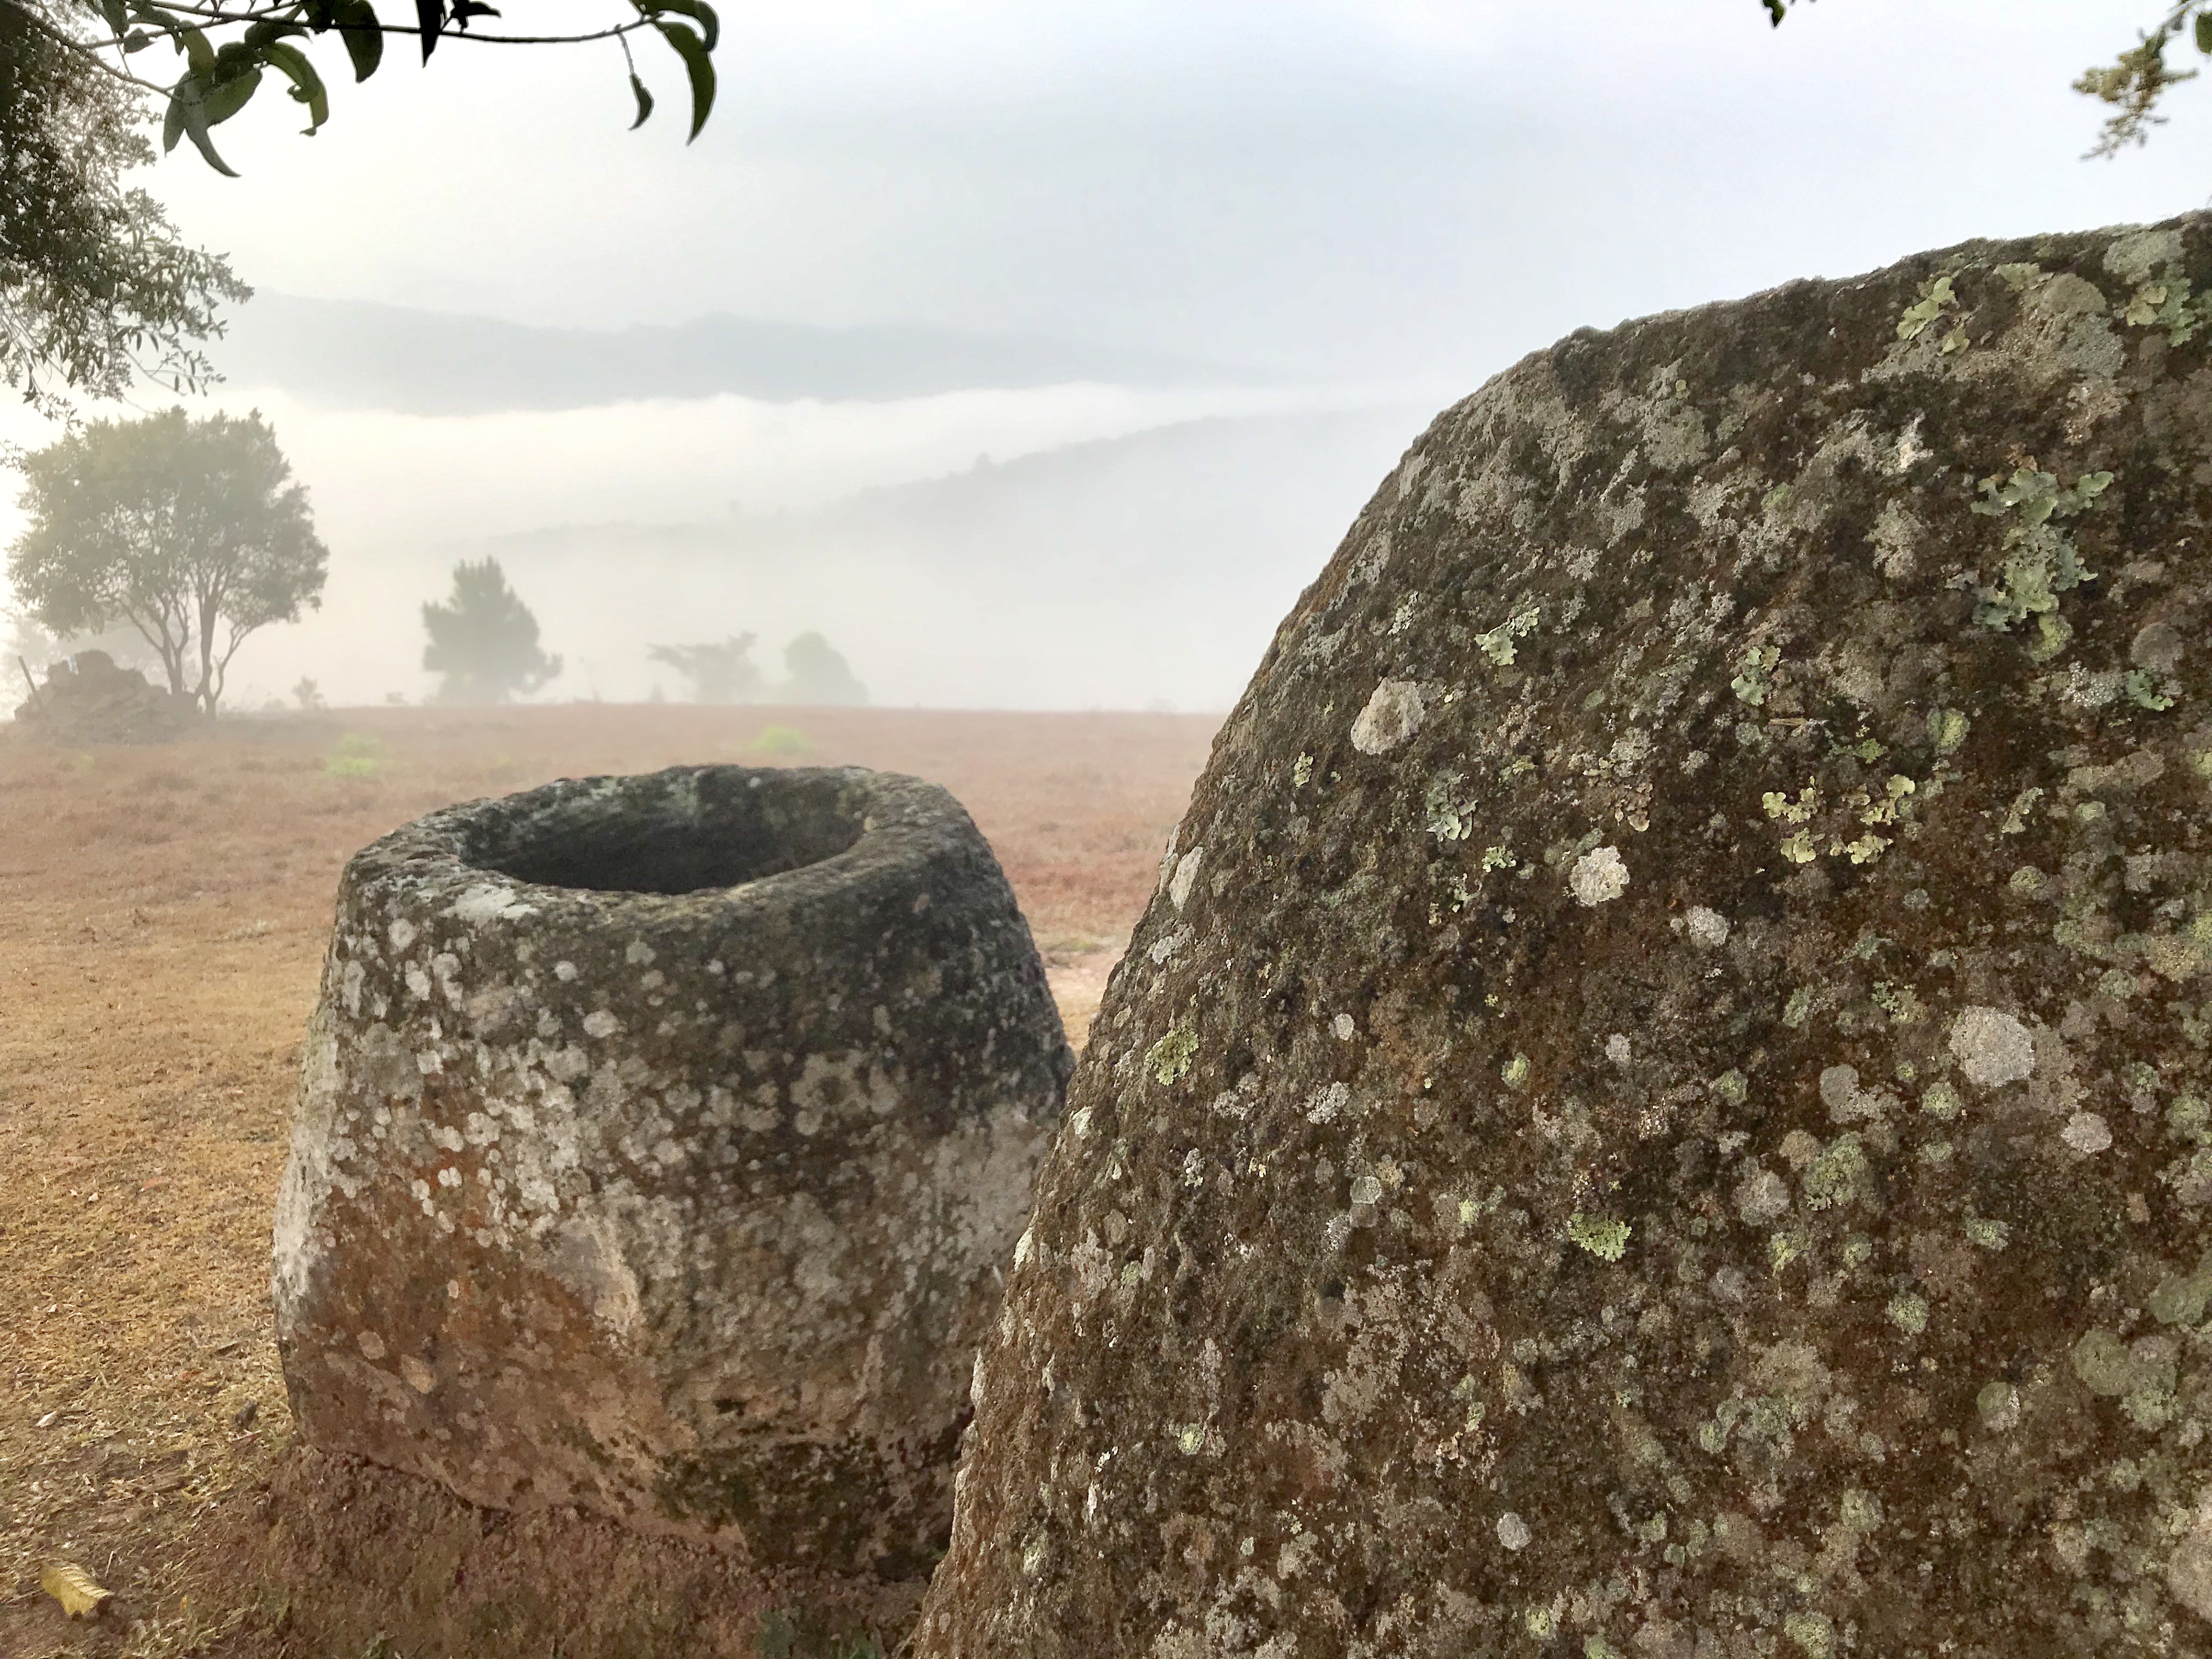 Mist day at Site 2 showing two sandstone megalithic jars